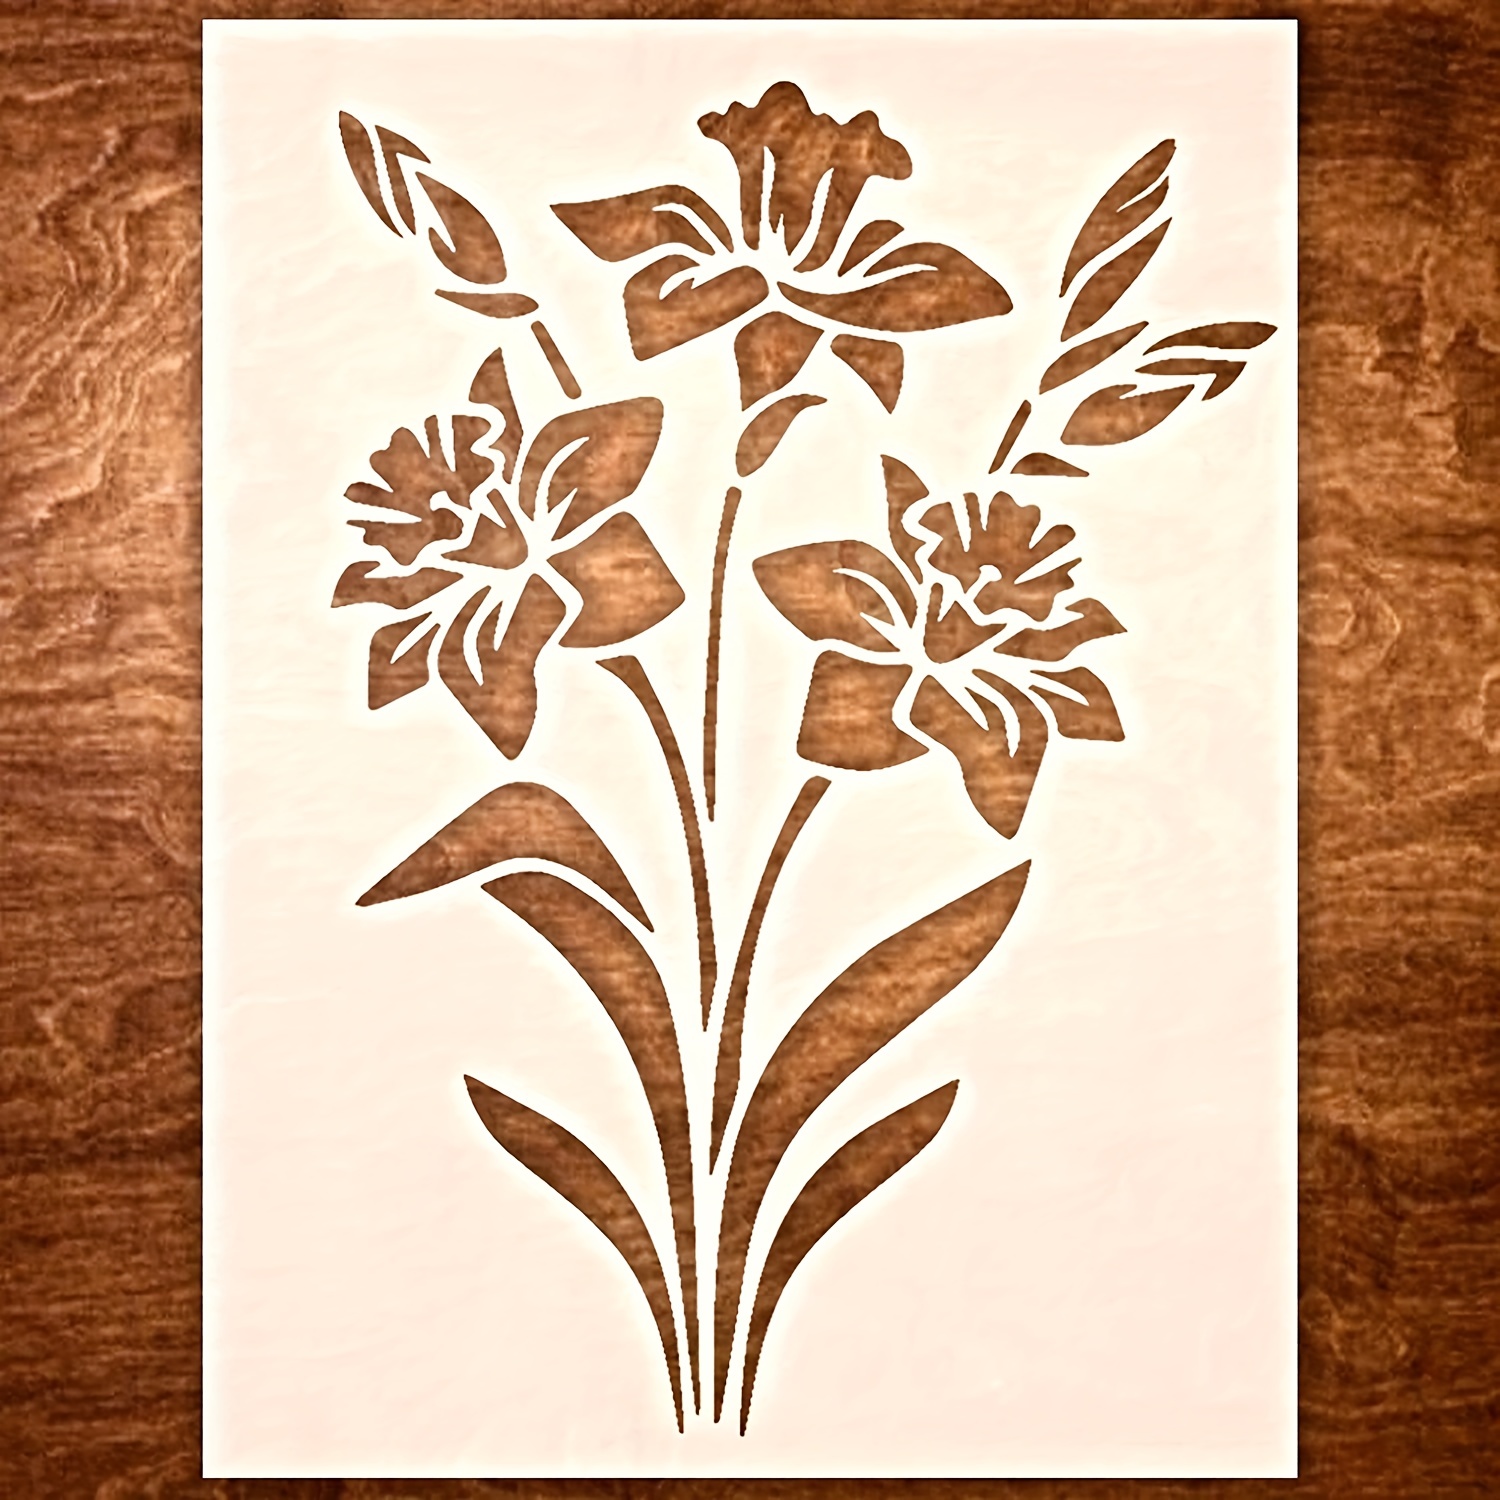 Arts and Crafts stencils from The Stencil Library. Buy from our